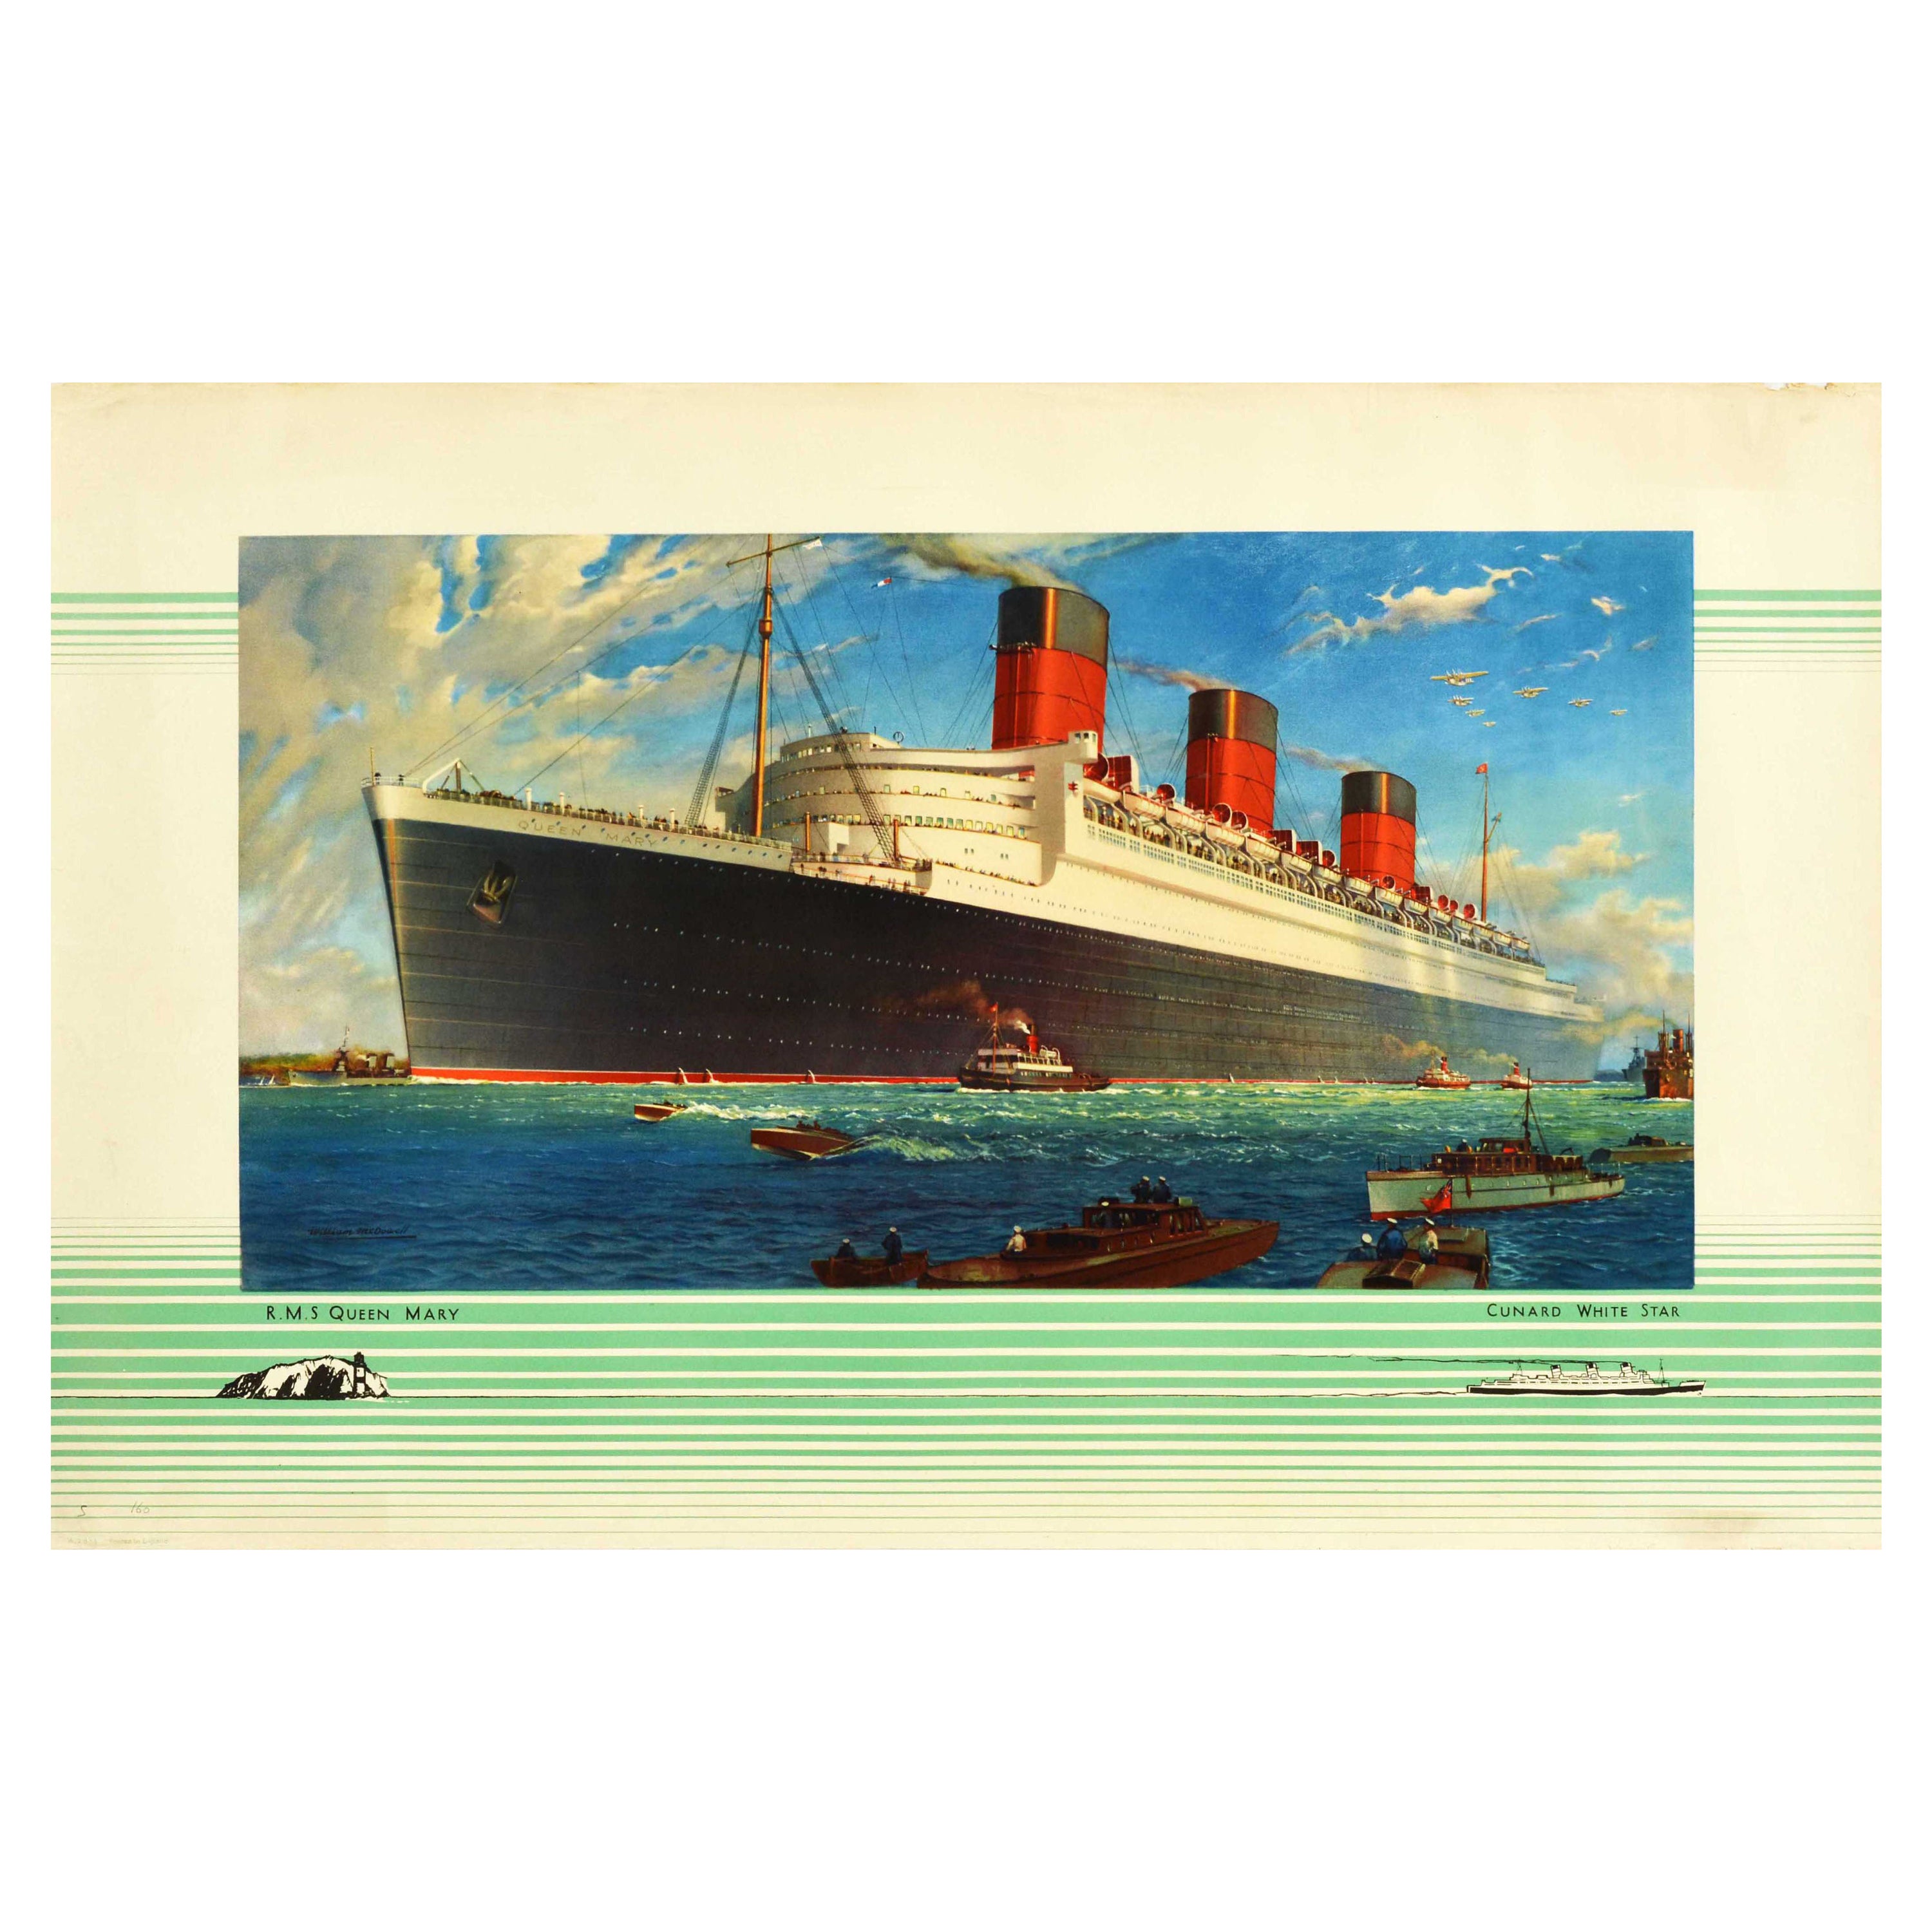 Original Vintage Ship Poster Cunard White Star RMS Queen Mary Ocean Liner Travel